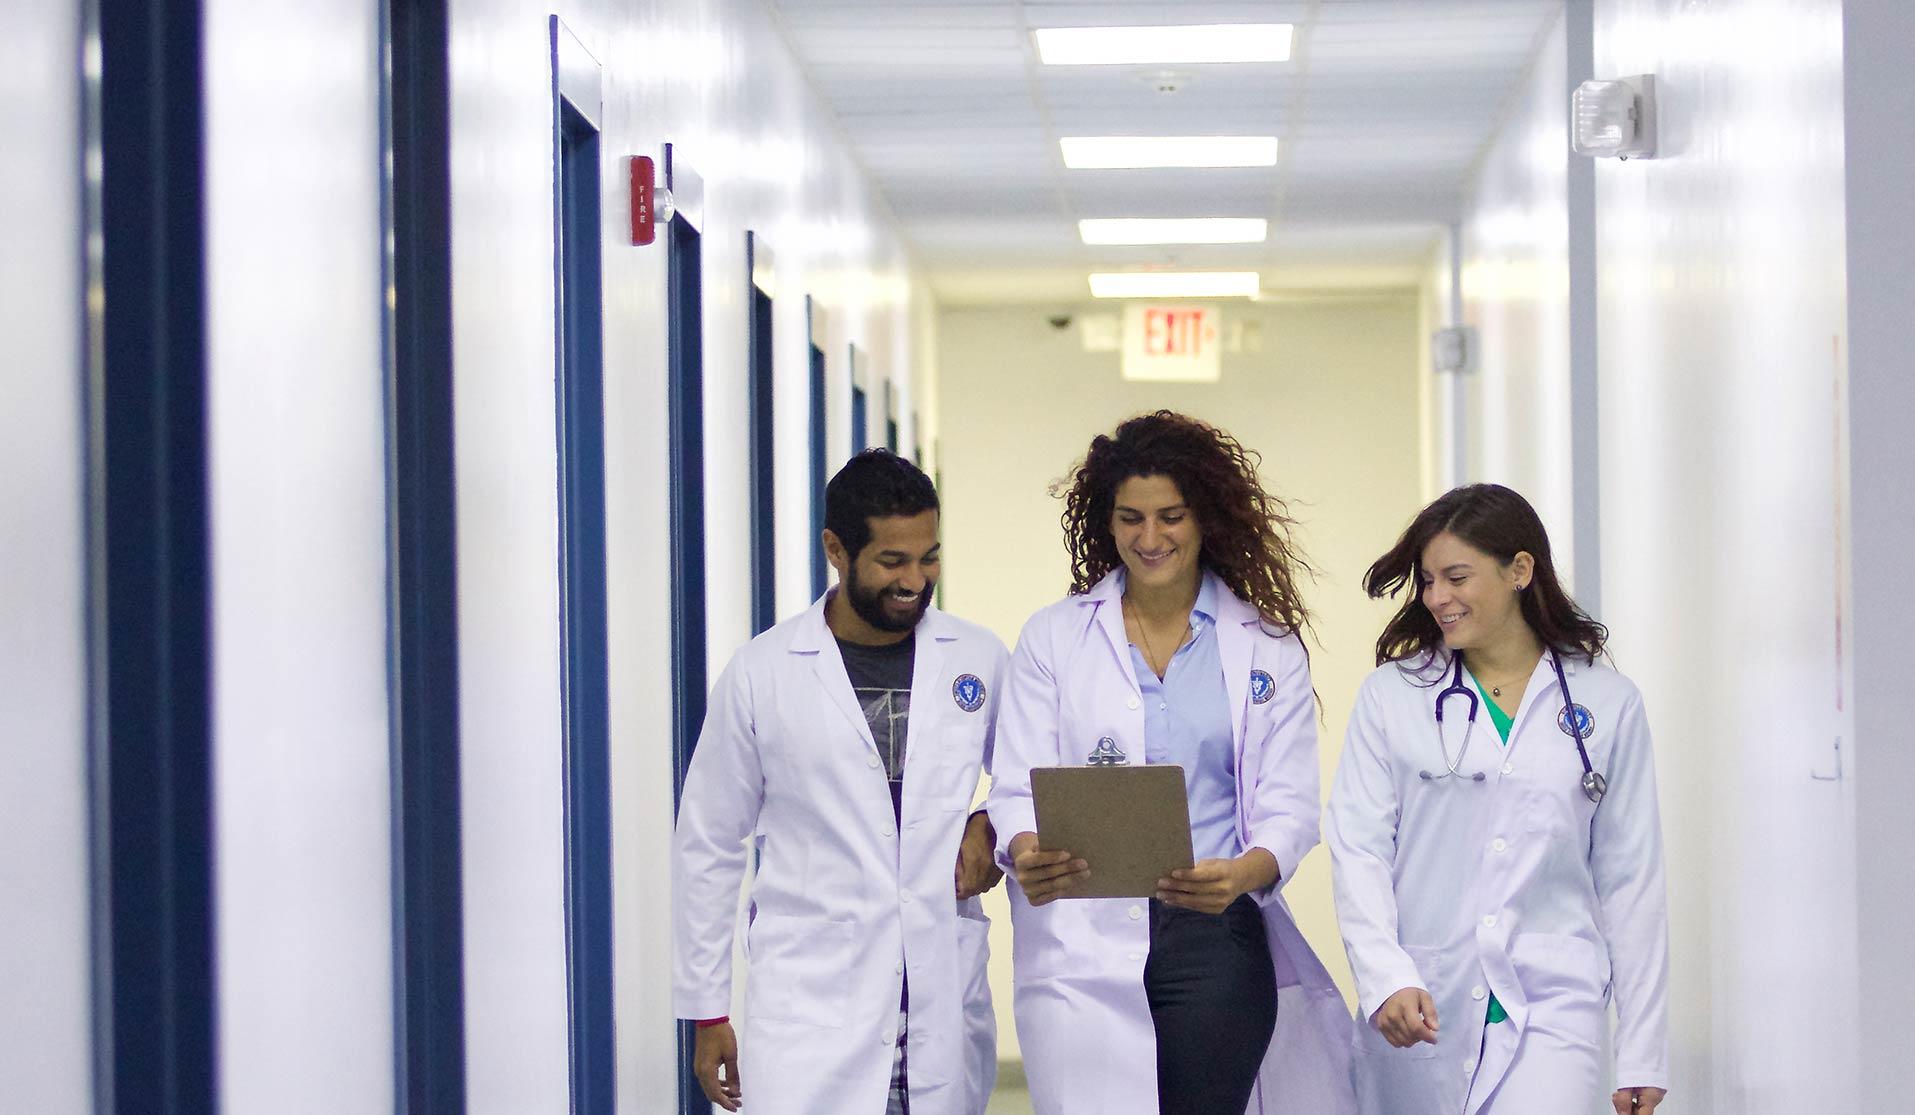 Three veterinarian students laughing and walking down a hallway